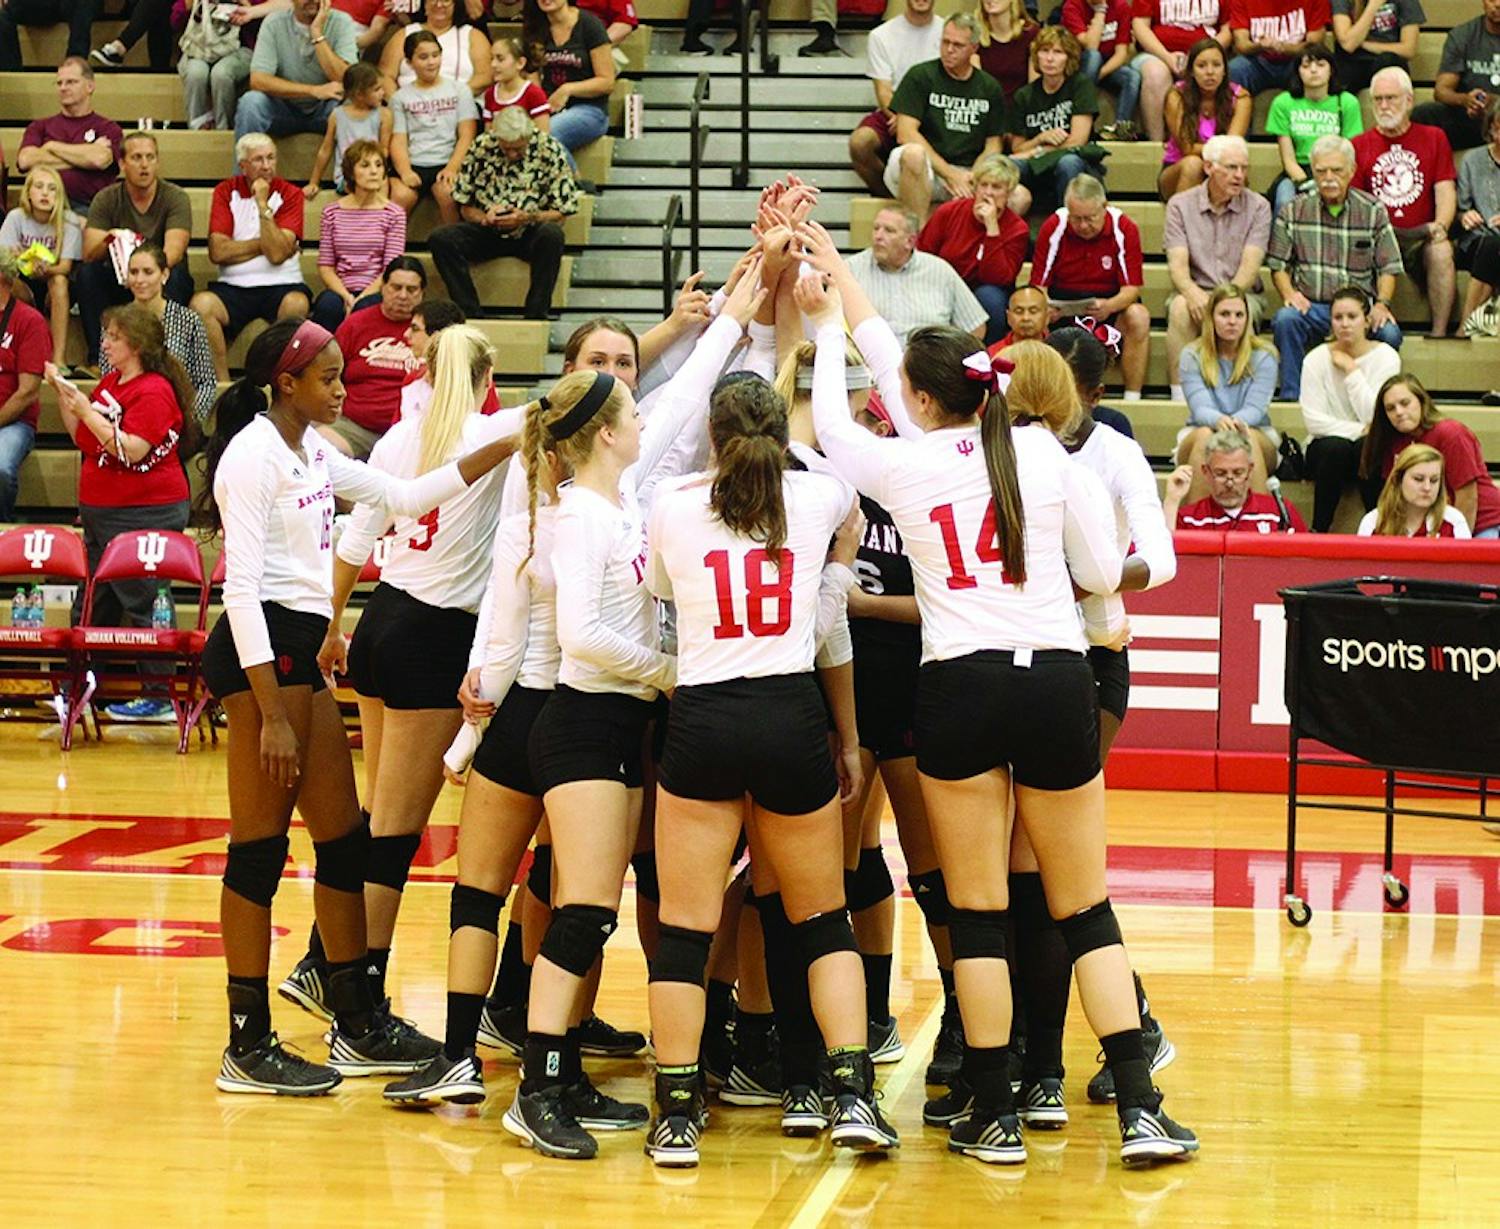 The IU volleyball team cheers before their game against Arkansas State on Sept. 16, 2016 at IU University Gym. The team will open up Big Ten Conference play against Northwestern on Friday.&nbsp;